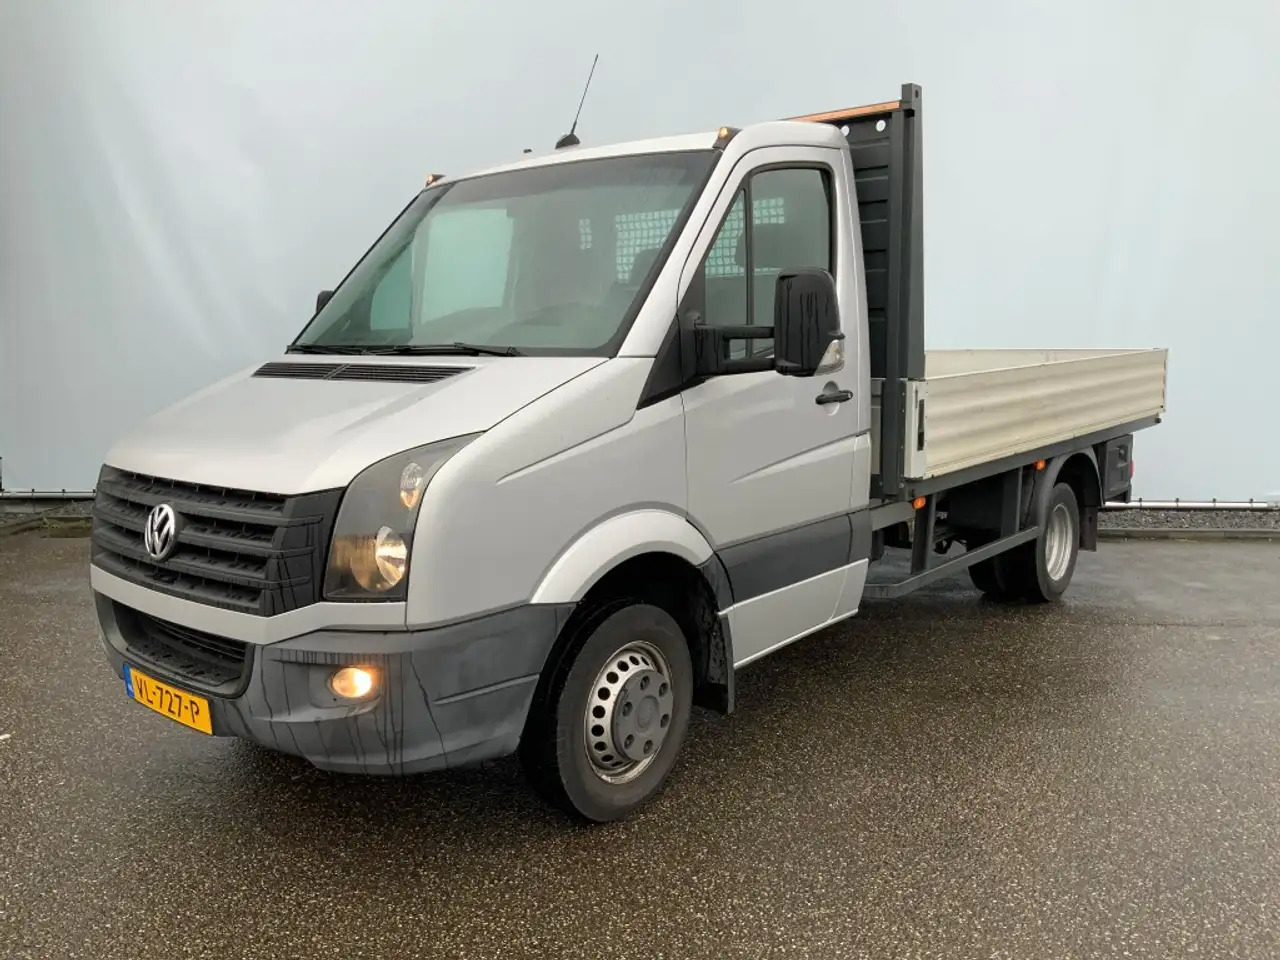 Leasing Volkswagen Crafter 46 2.0 TDI L2H1 Pick Up Airco Navi Cruise 3 Zits E Volkswagen Crafter 46 2.0 TDI L2H1 Pick Up Airco Navi Cruise 3 Zits E: gambar 1